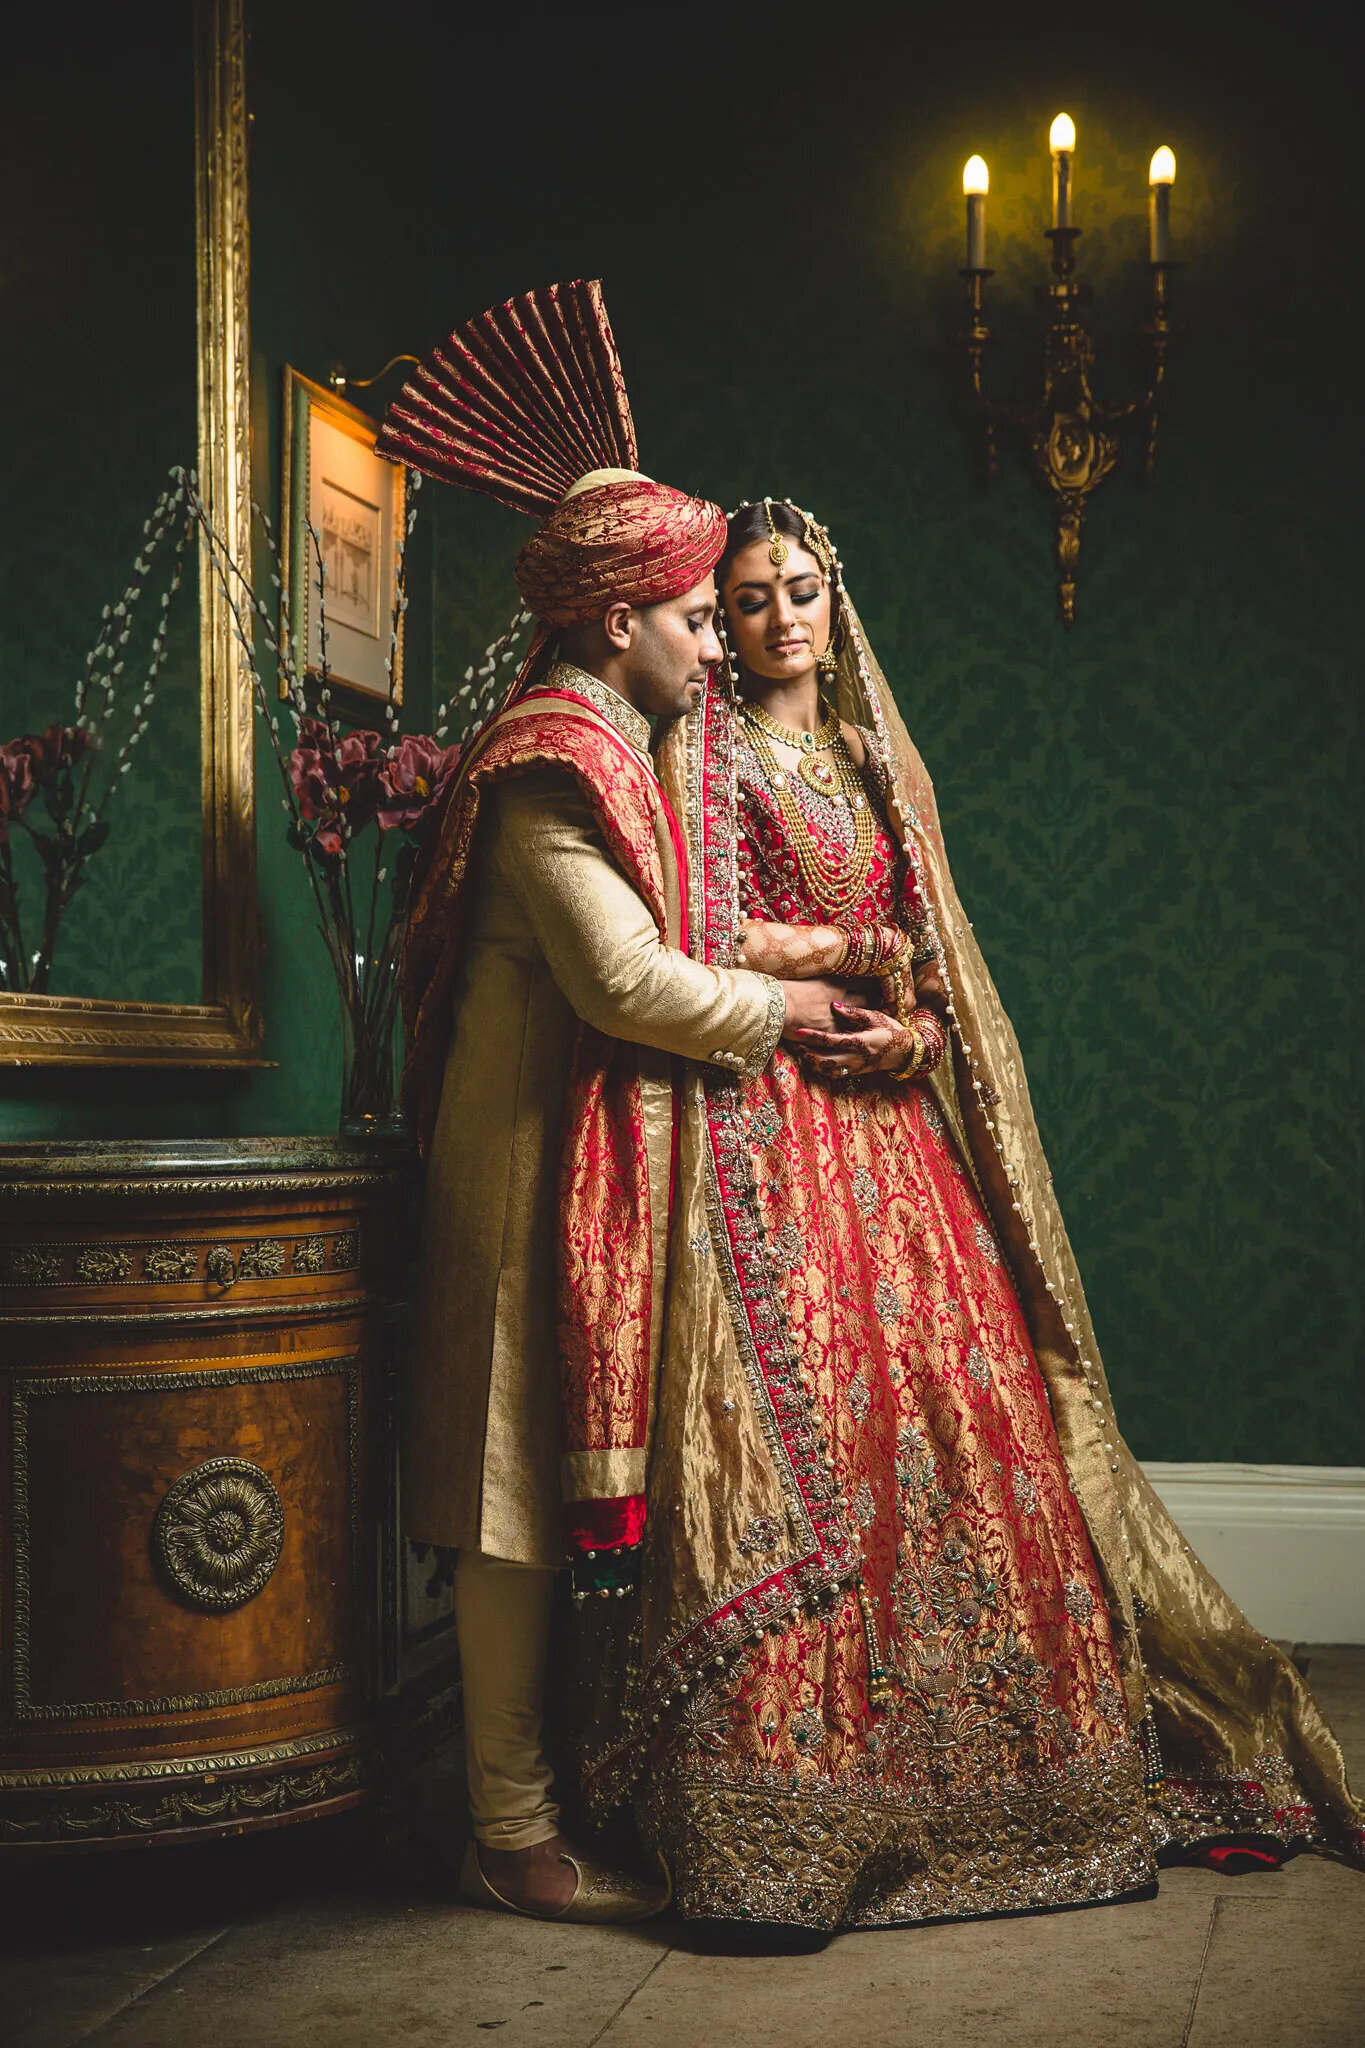 creative wedding photo of a brie and groom at their hindu wedding by indian wedding photographer tobiah tayo